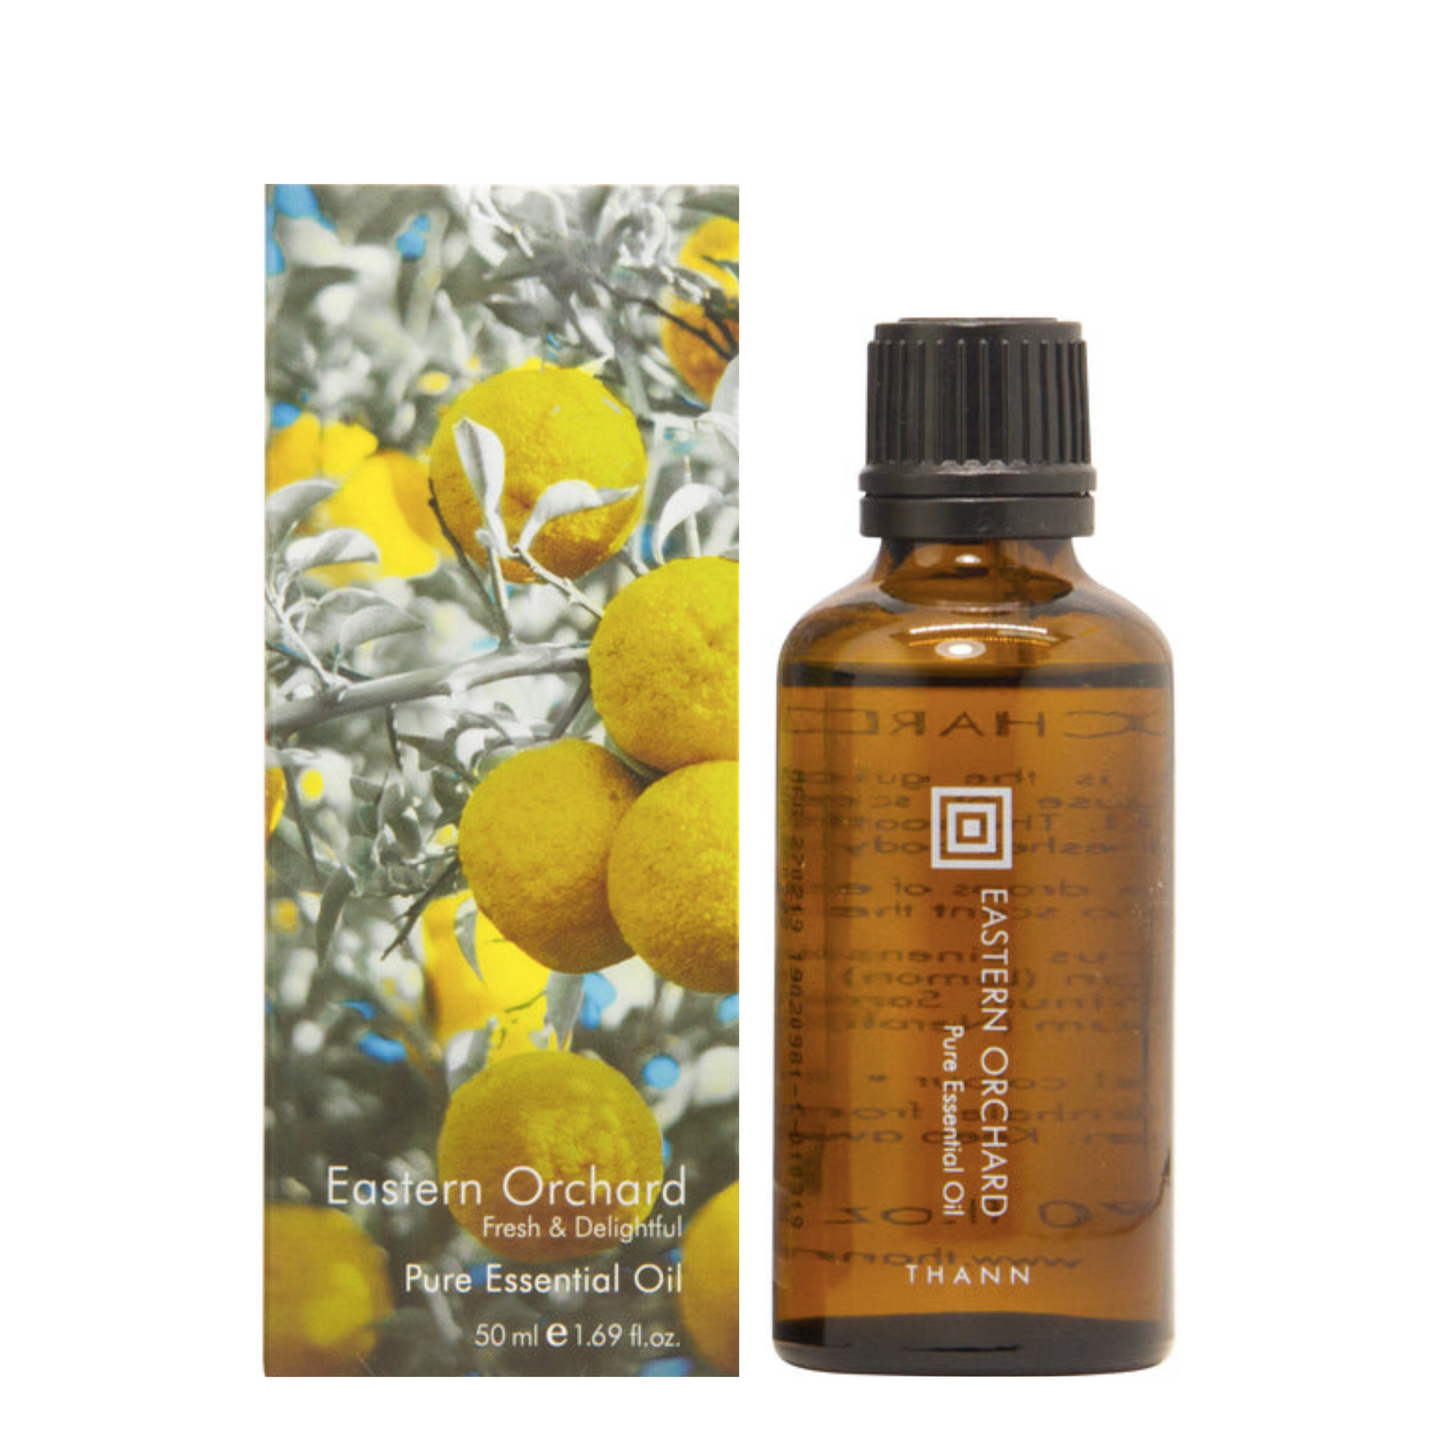 Eastern Orchard Pure Essential Oil 50 ml